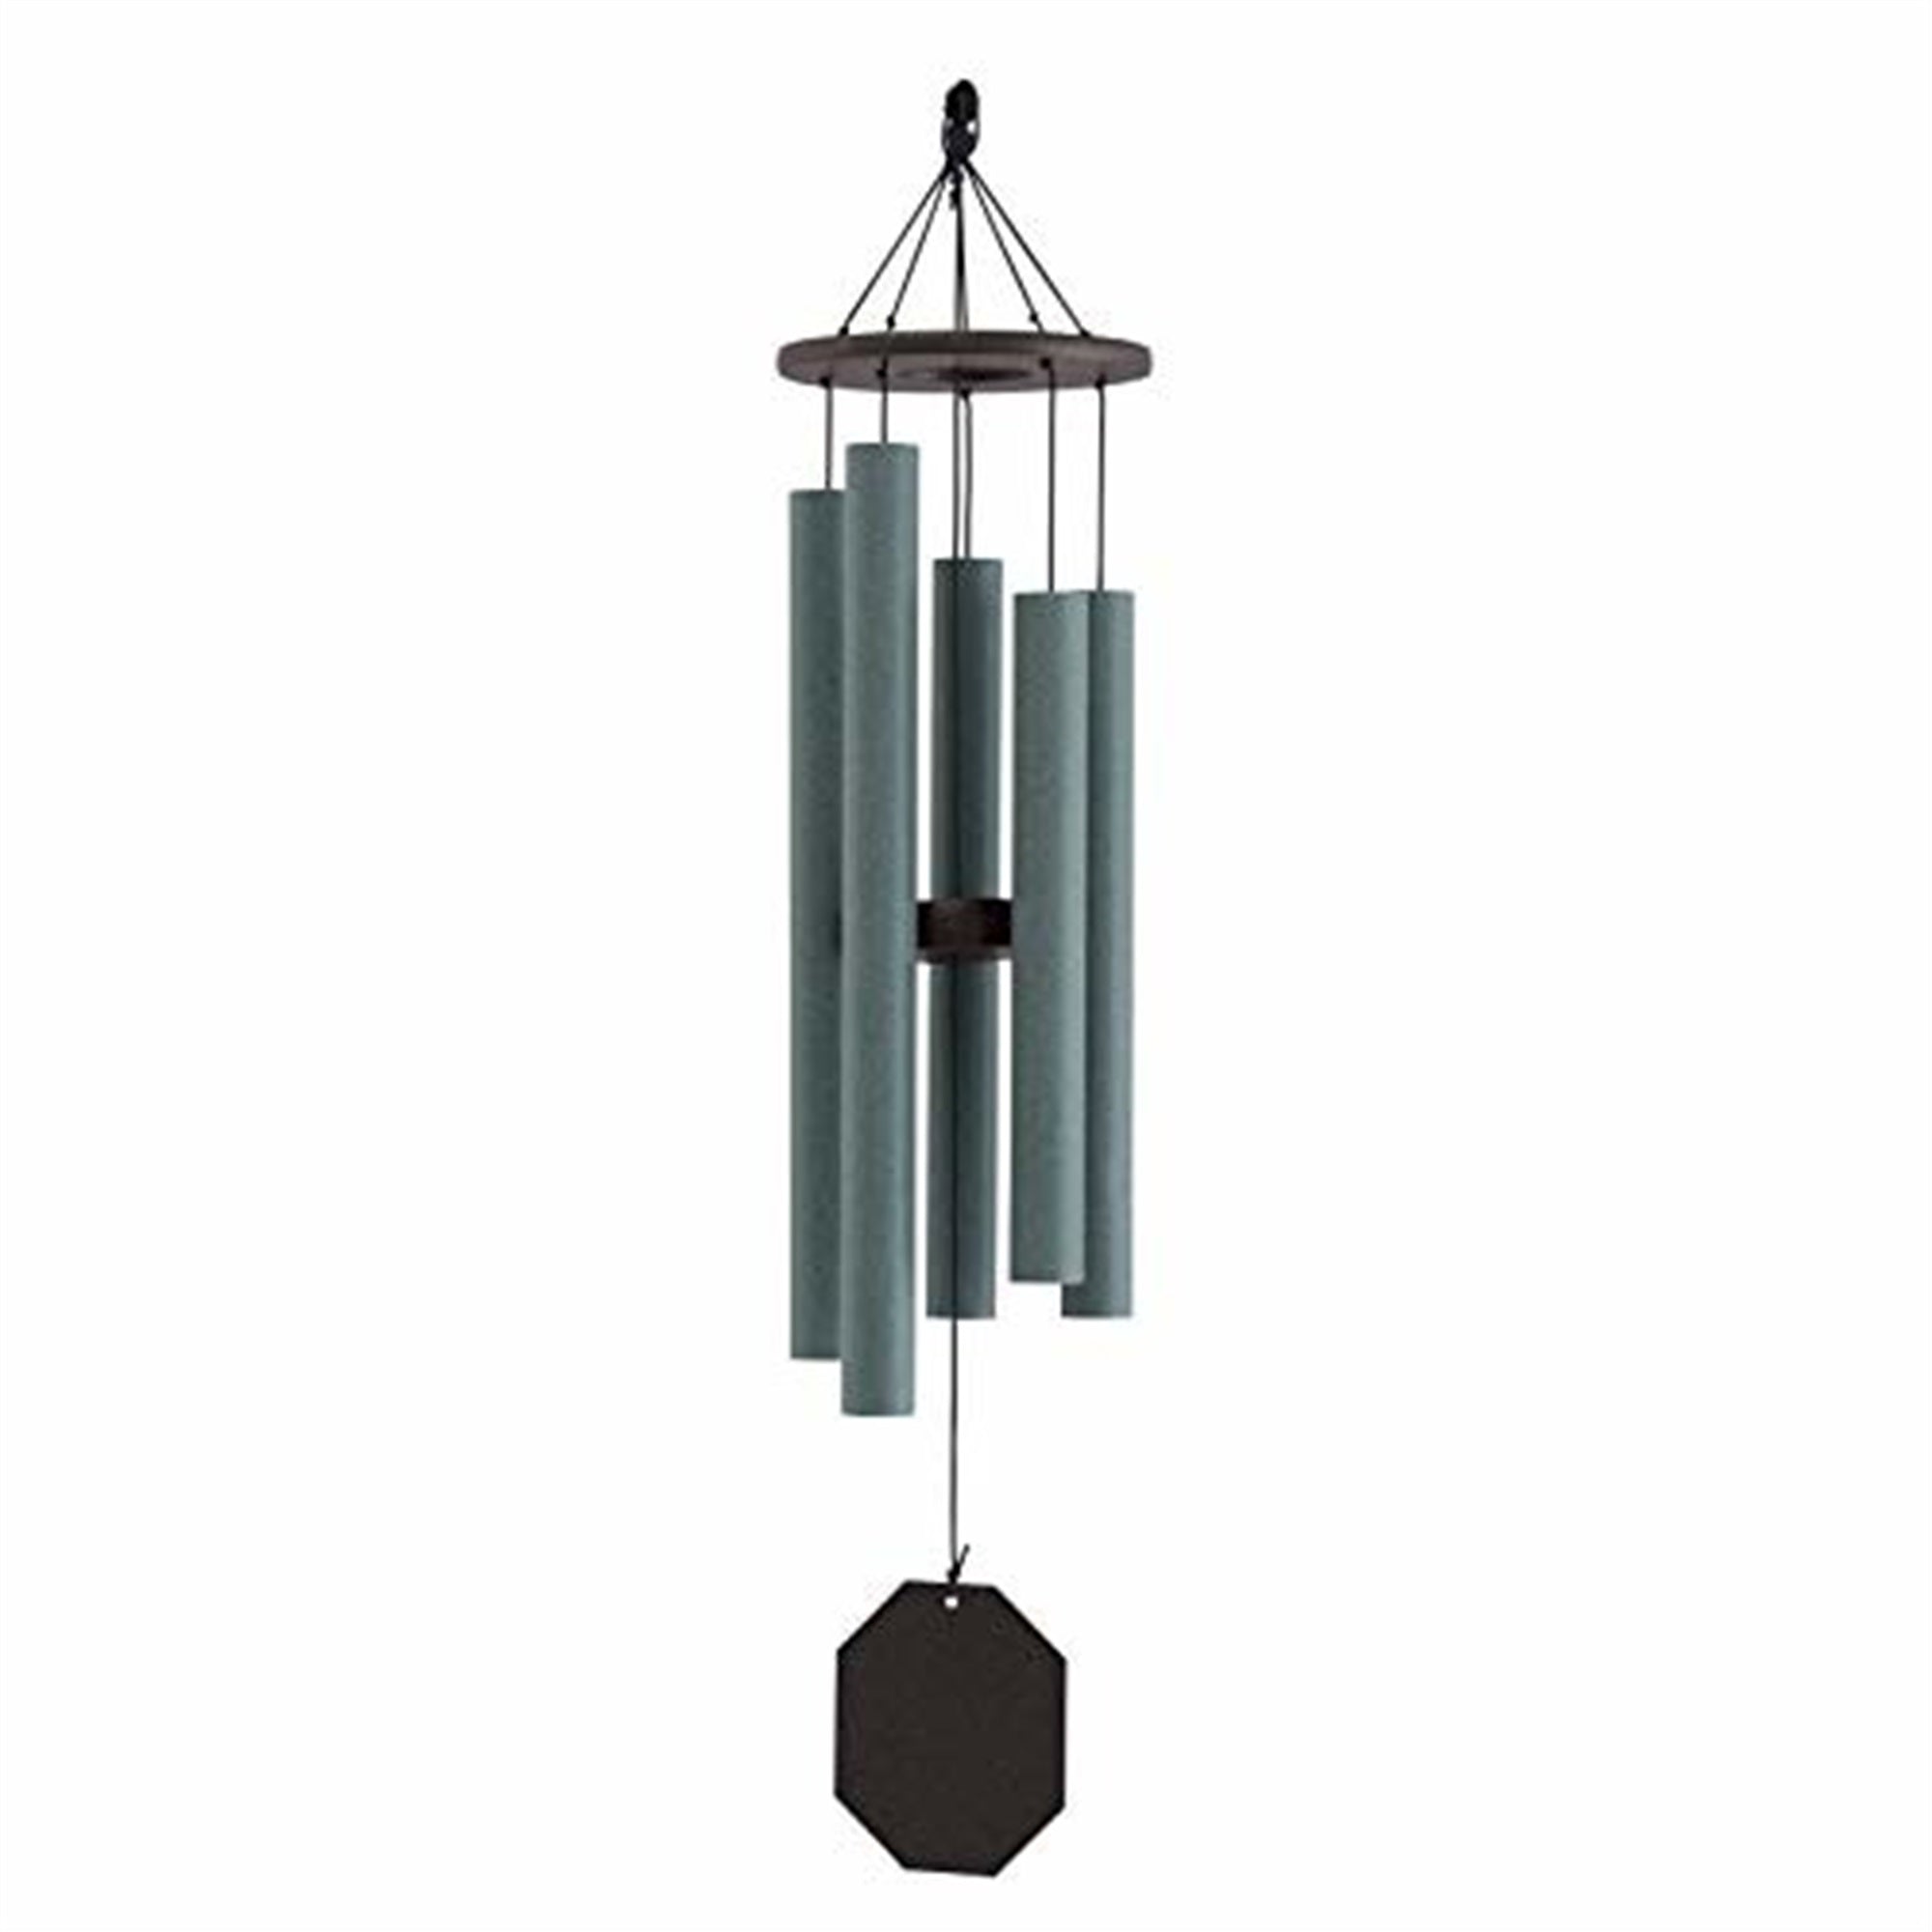 38 Solar Singer Wind Chime - Amish Handcrafted Country Chime